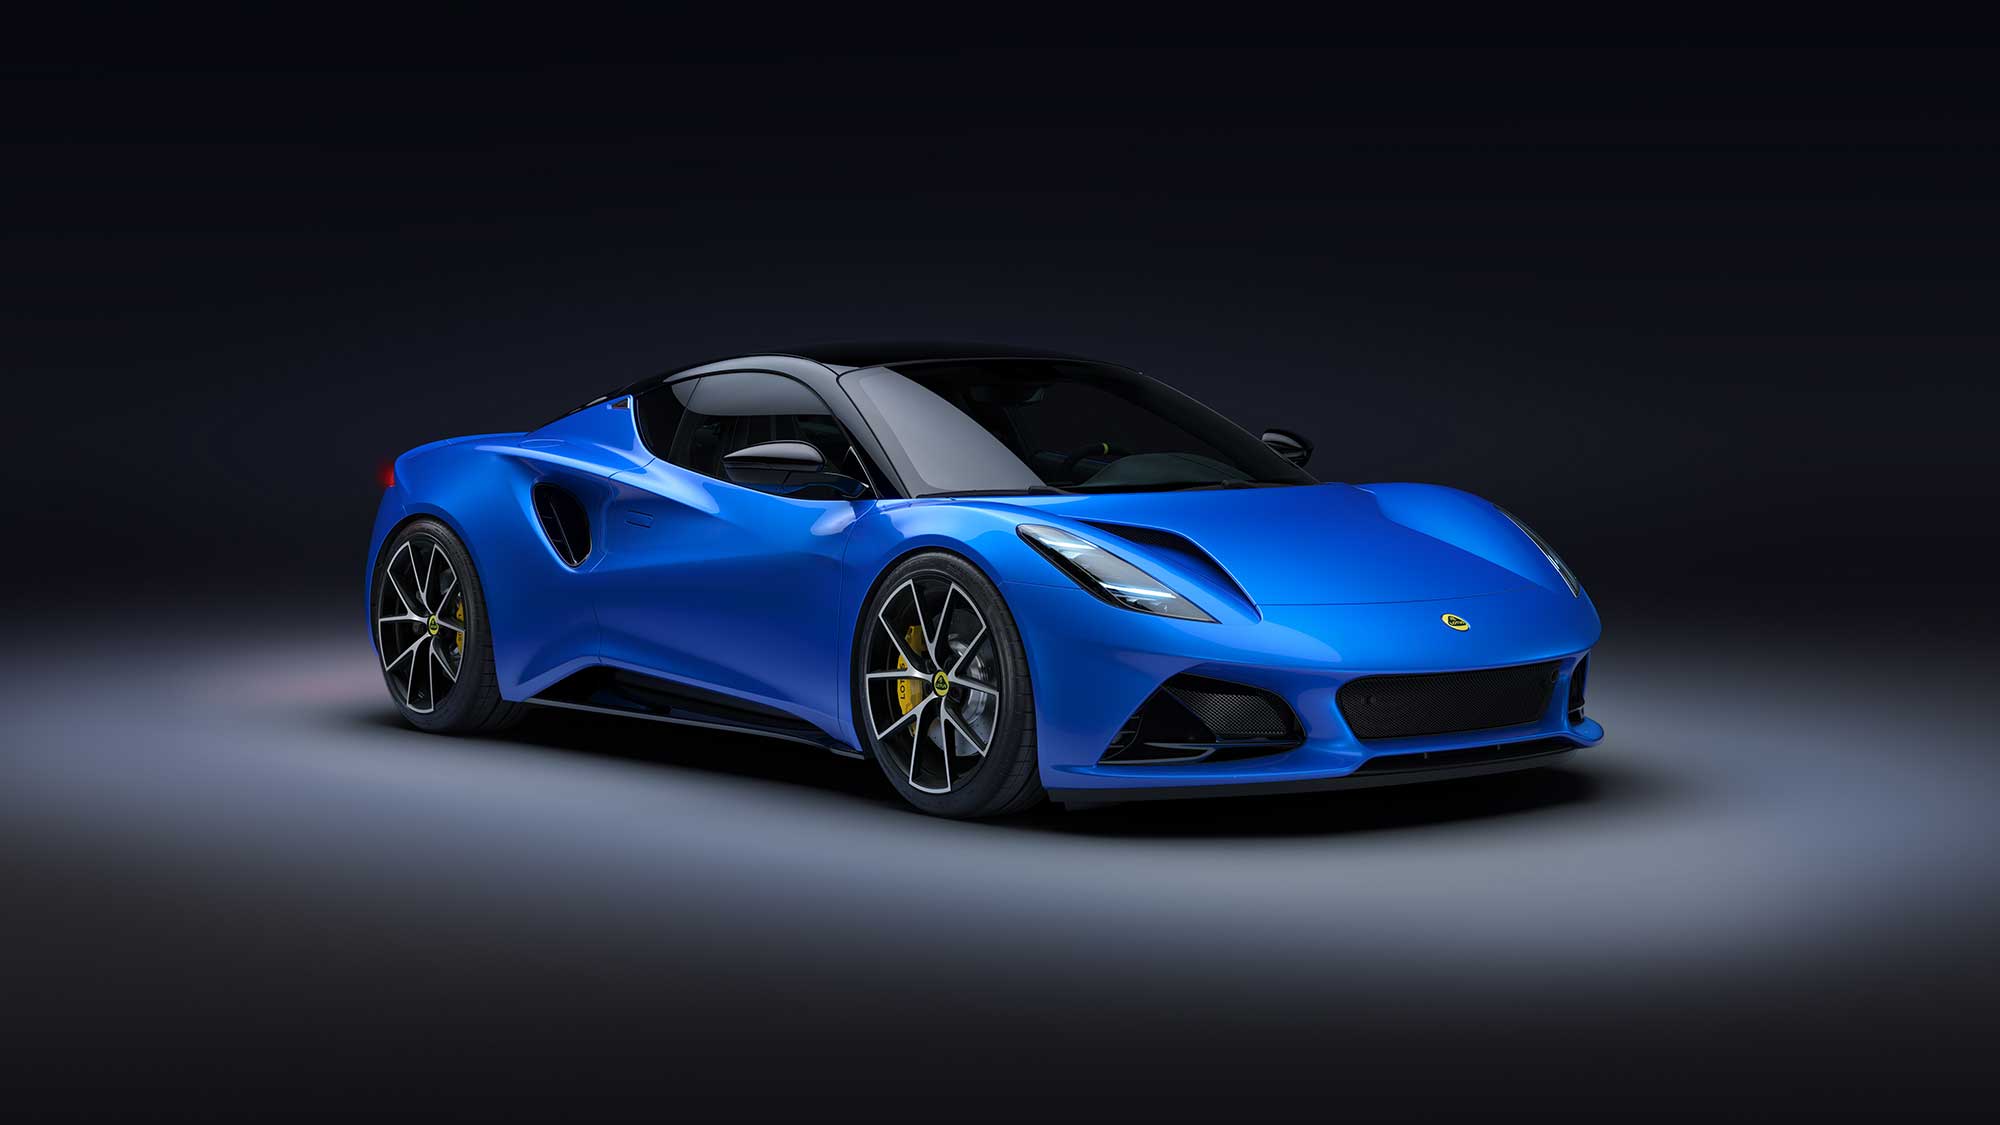  Looking for a Lotus Emira in Orlando, Florida? Check out our latest offers on the Lotus Emira for sale in Orlando, Florida. We have a great selection of Lotus Emira cars at competitive prices at Lotus Orlando.